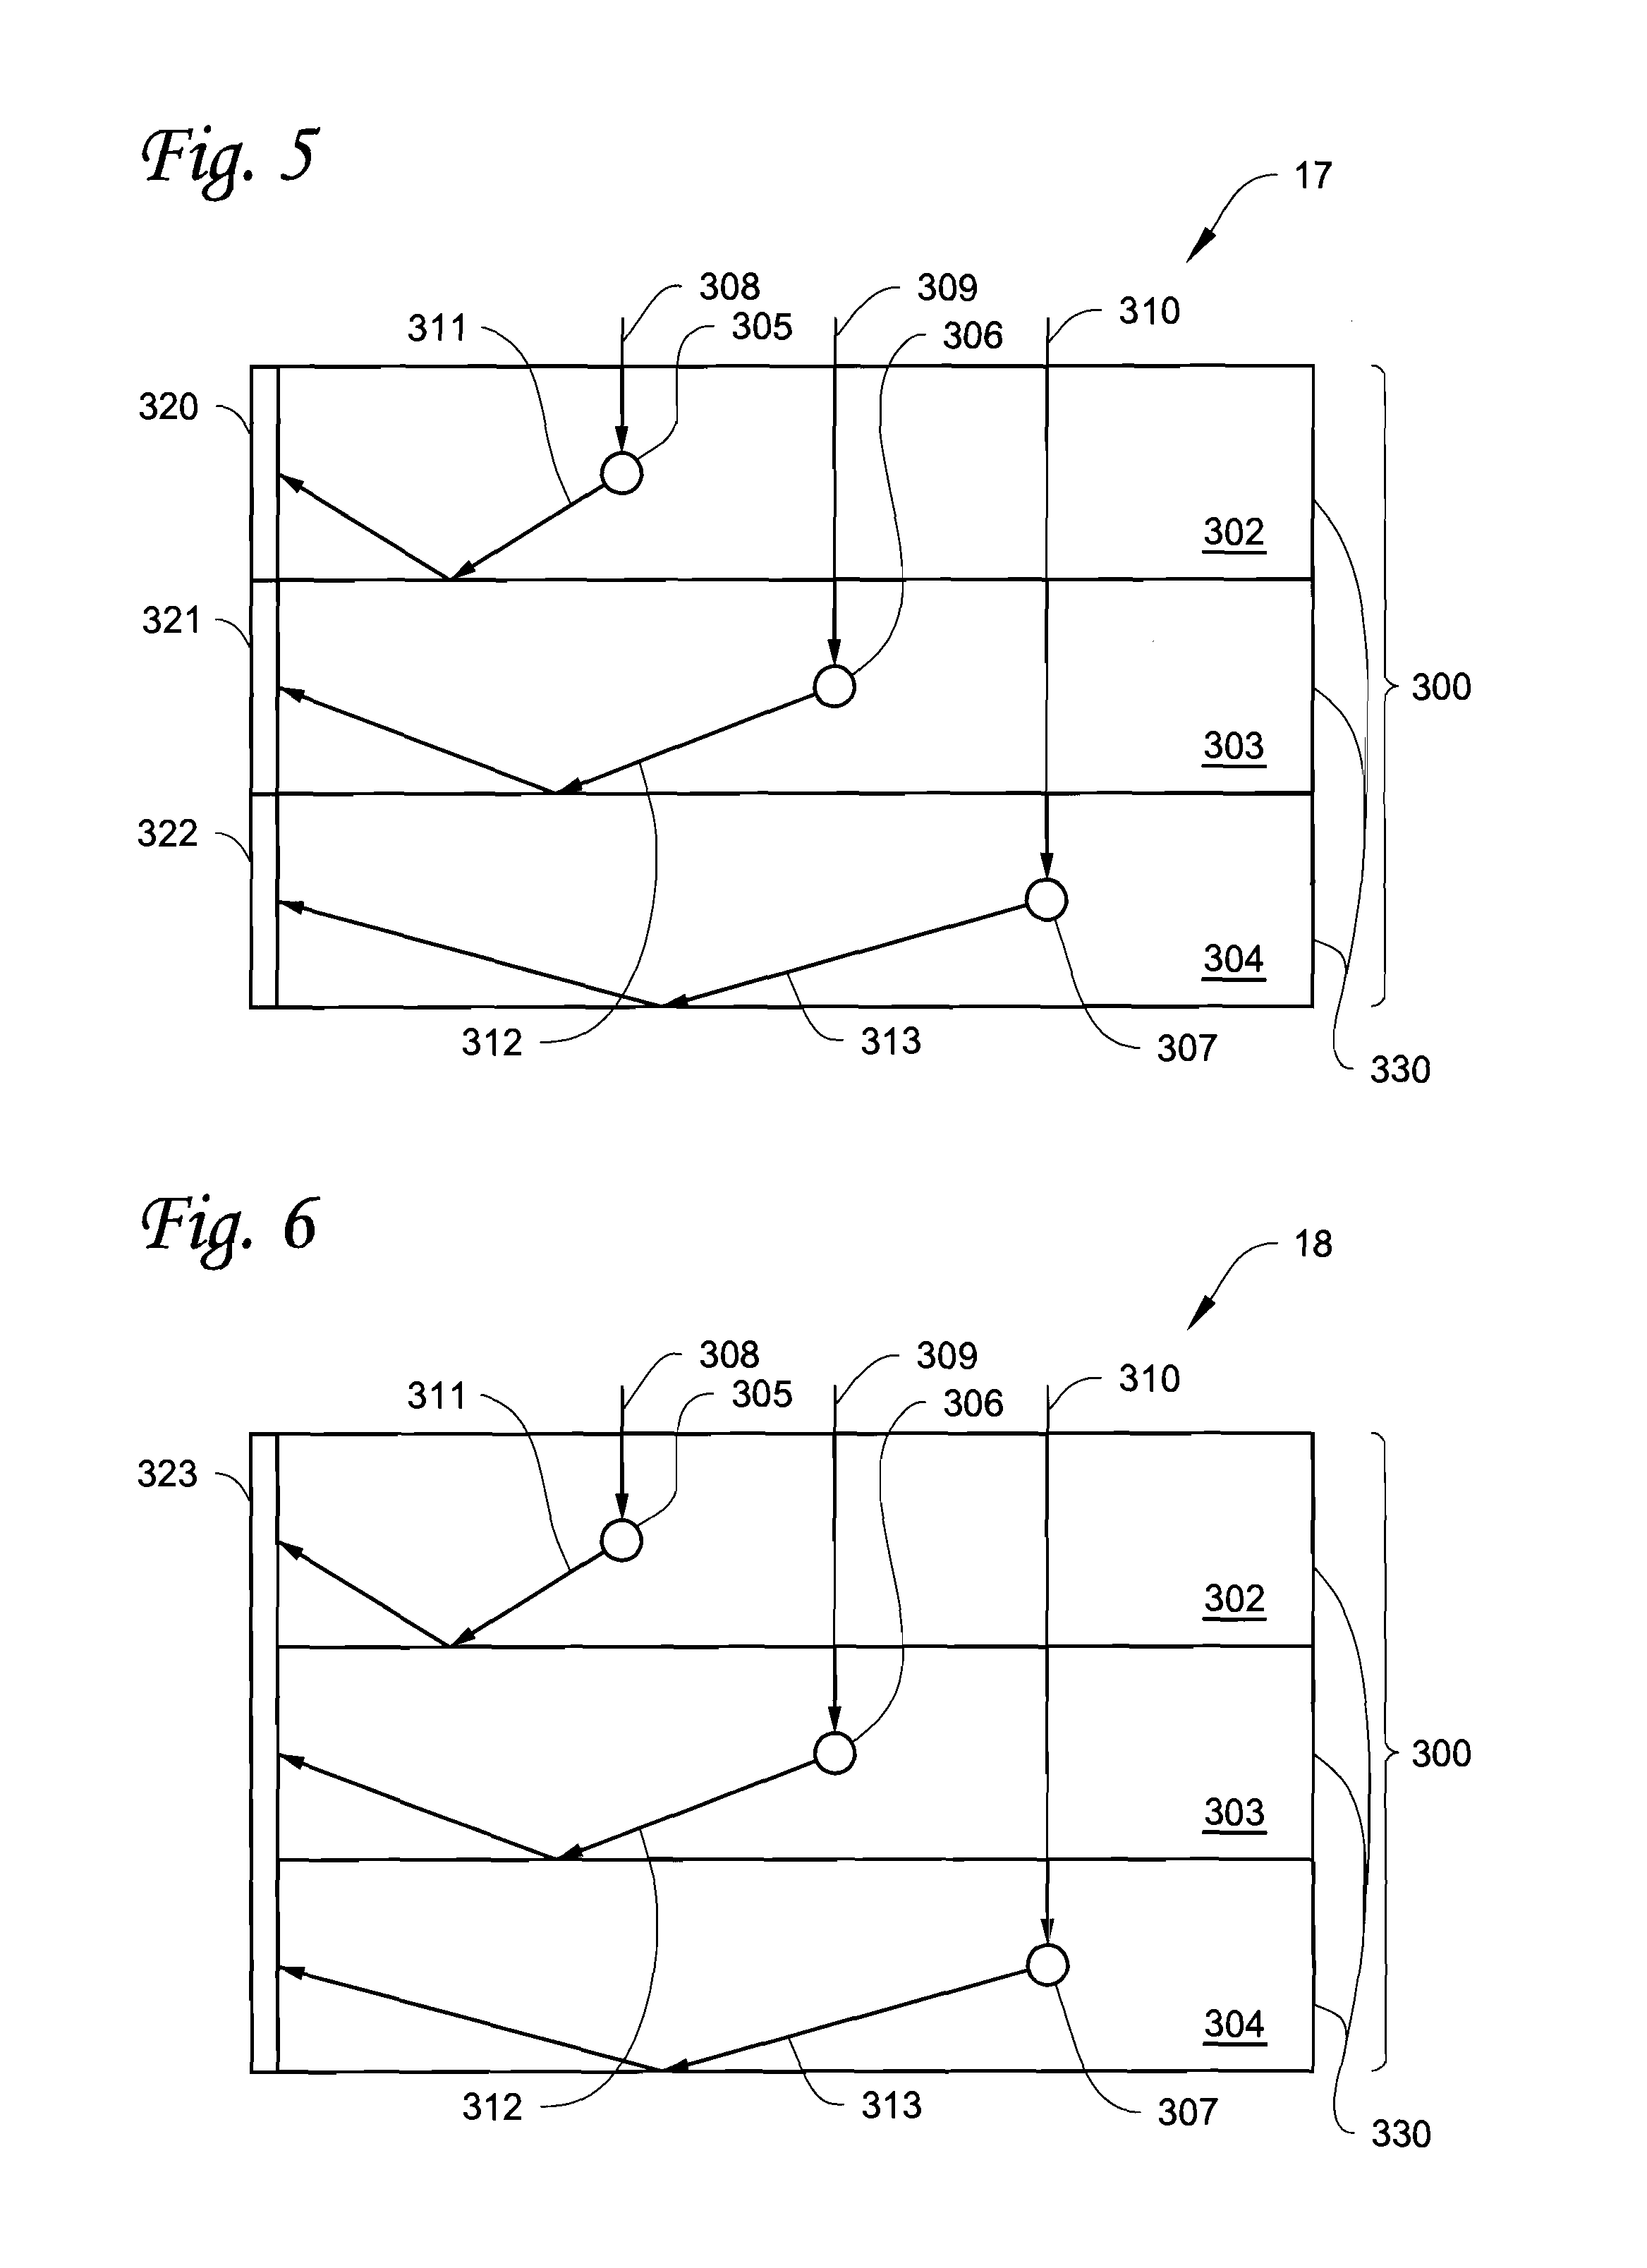 Device and method for converting incident radiation into electrical energy using an upconversion photoluminescent solar concentrator